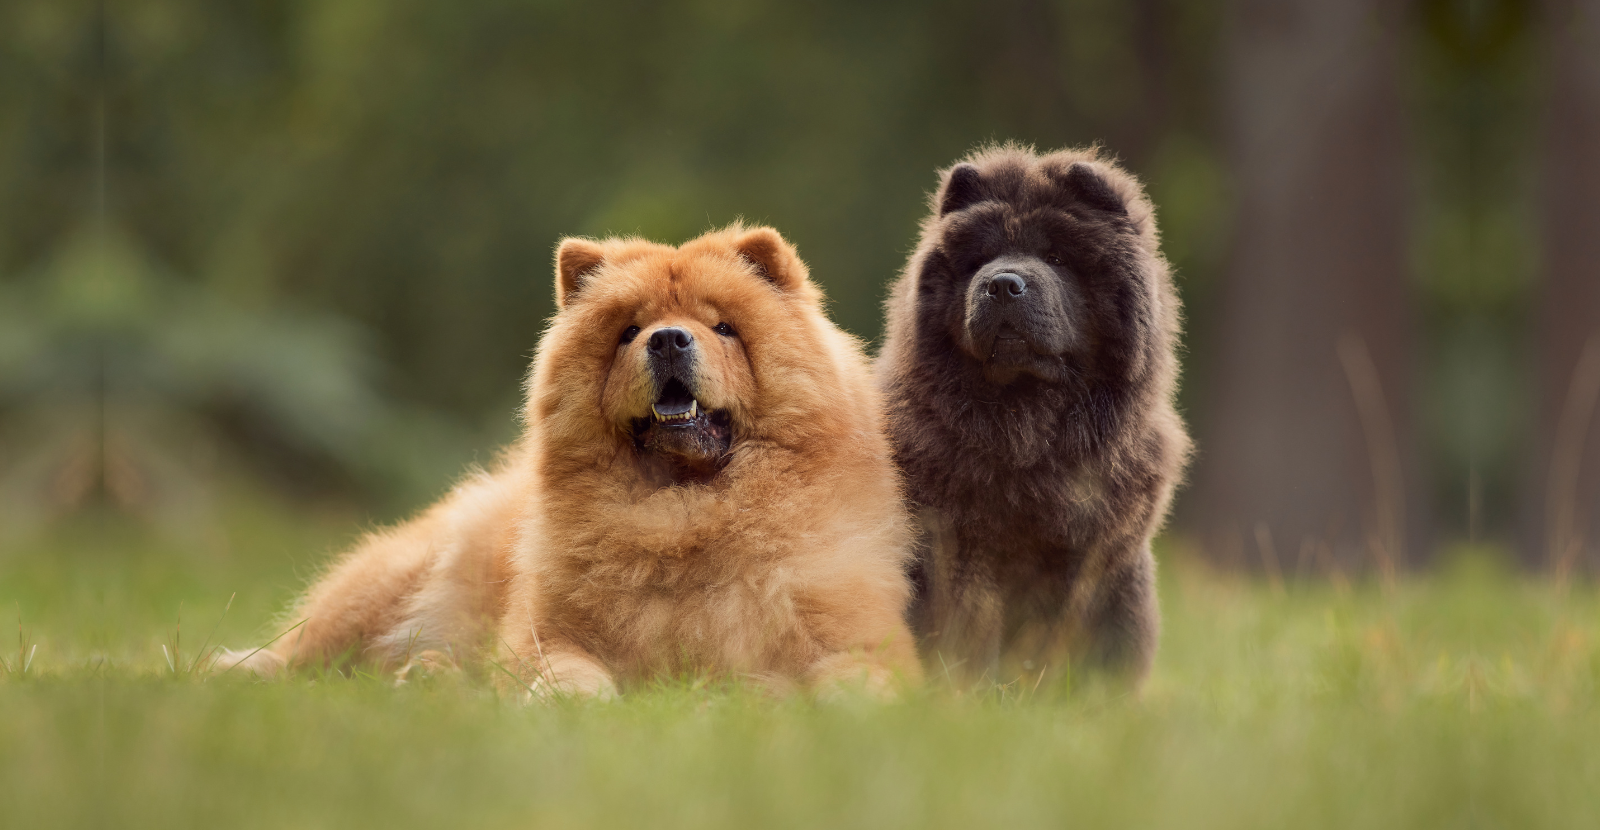 Ginger and Black Chow Chows